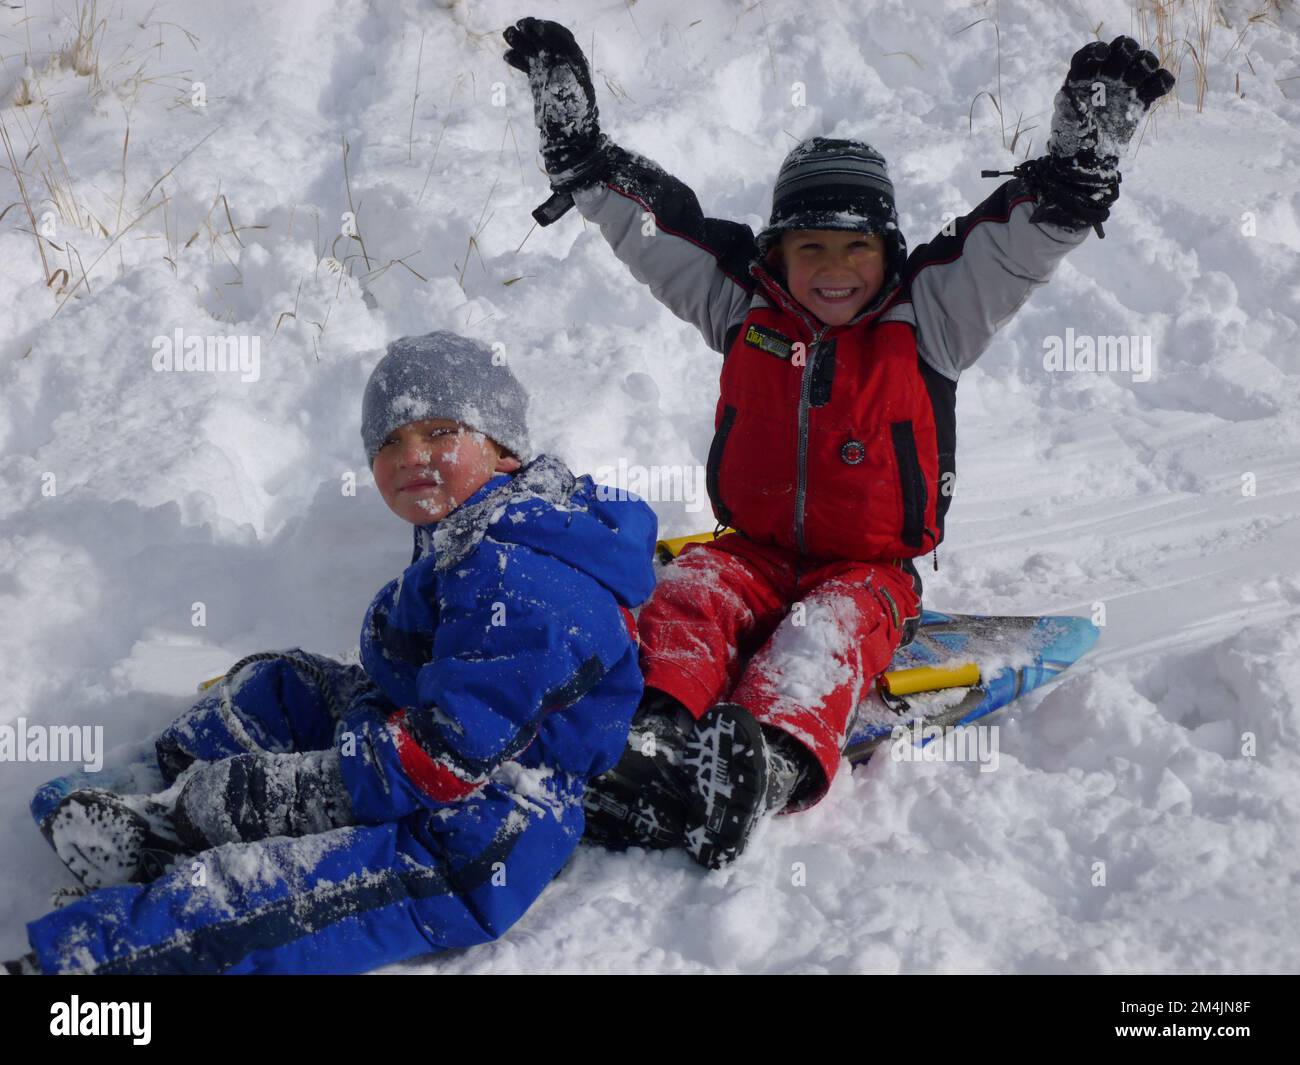 Kamas, Utah, USA, November 15, 2022.  Victory and defeat!  Sledding, with differing outcomes for two young boys. Stock Photo